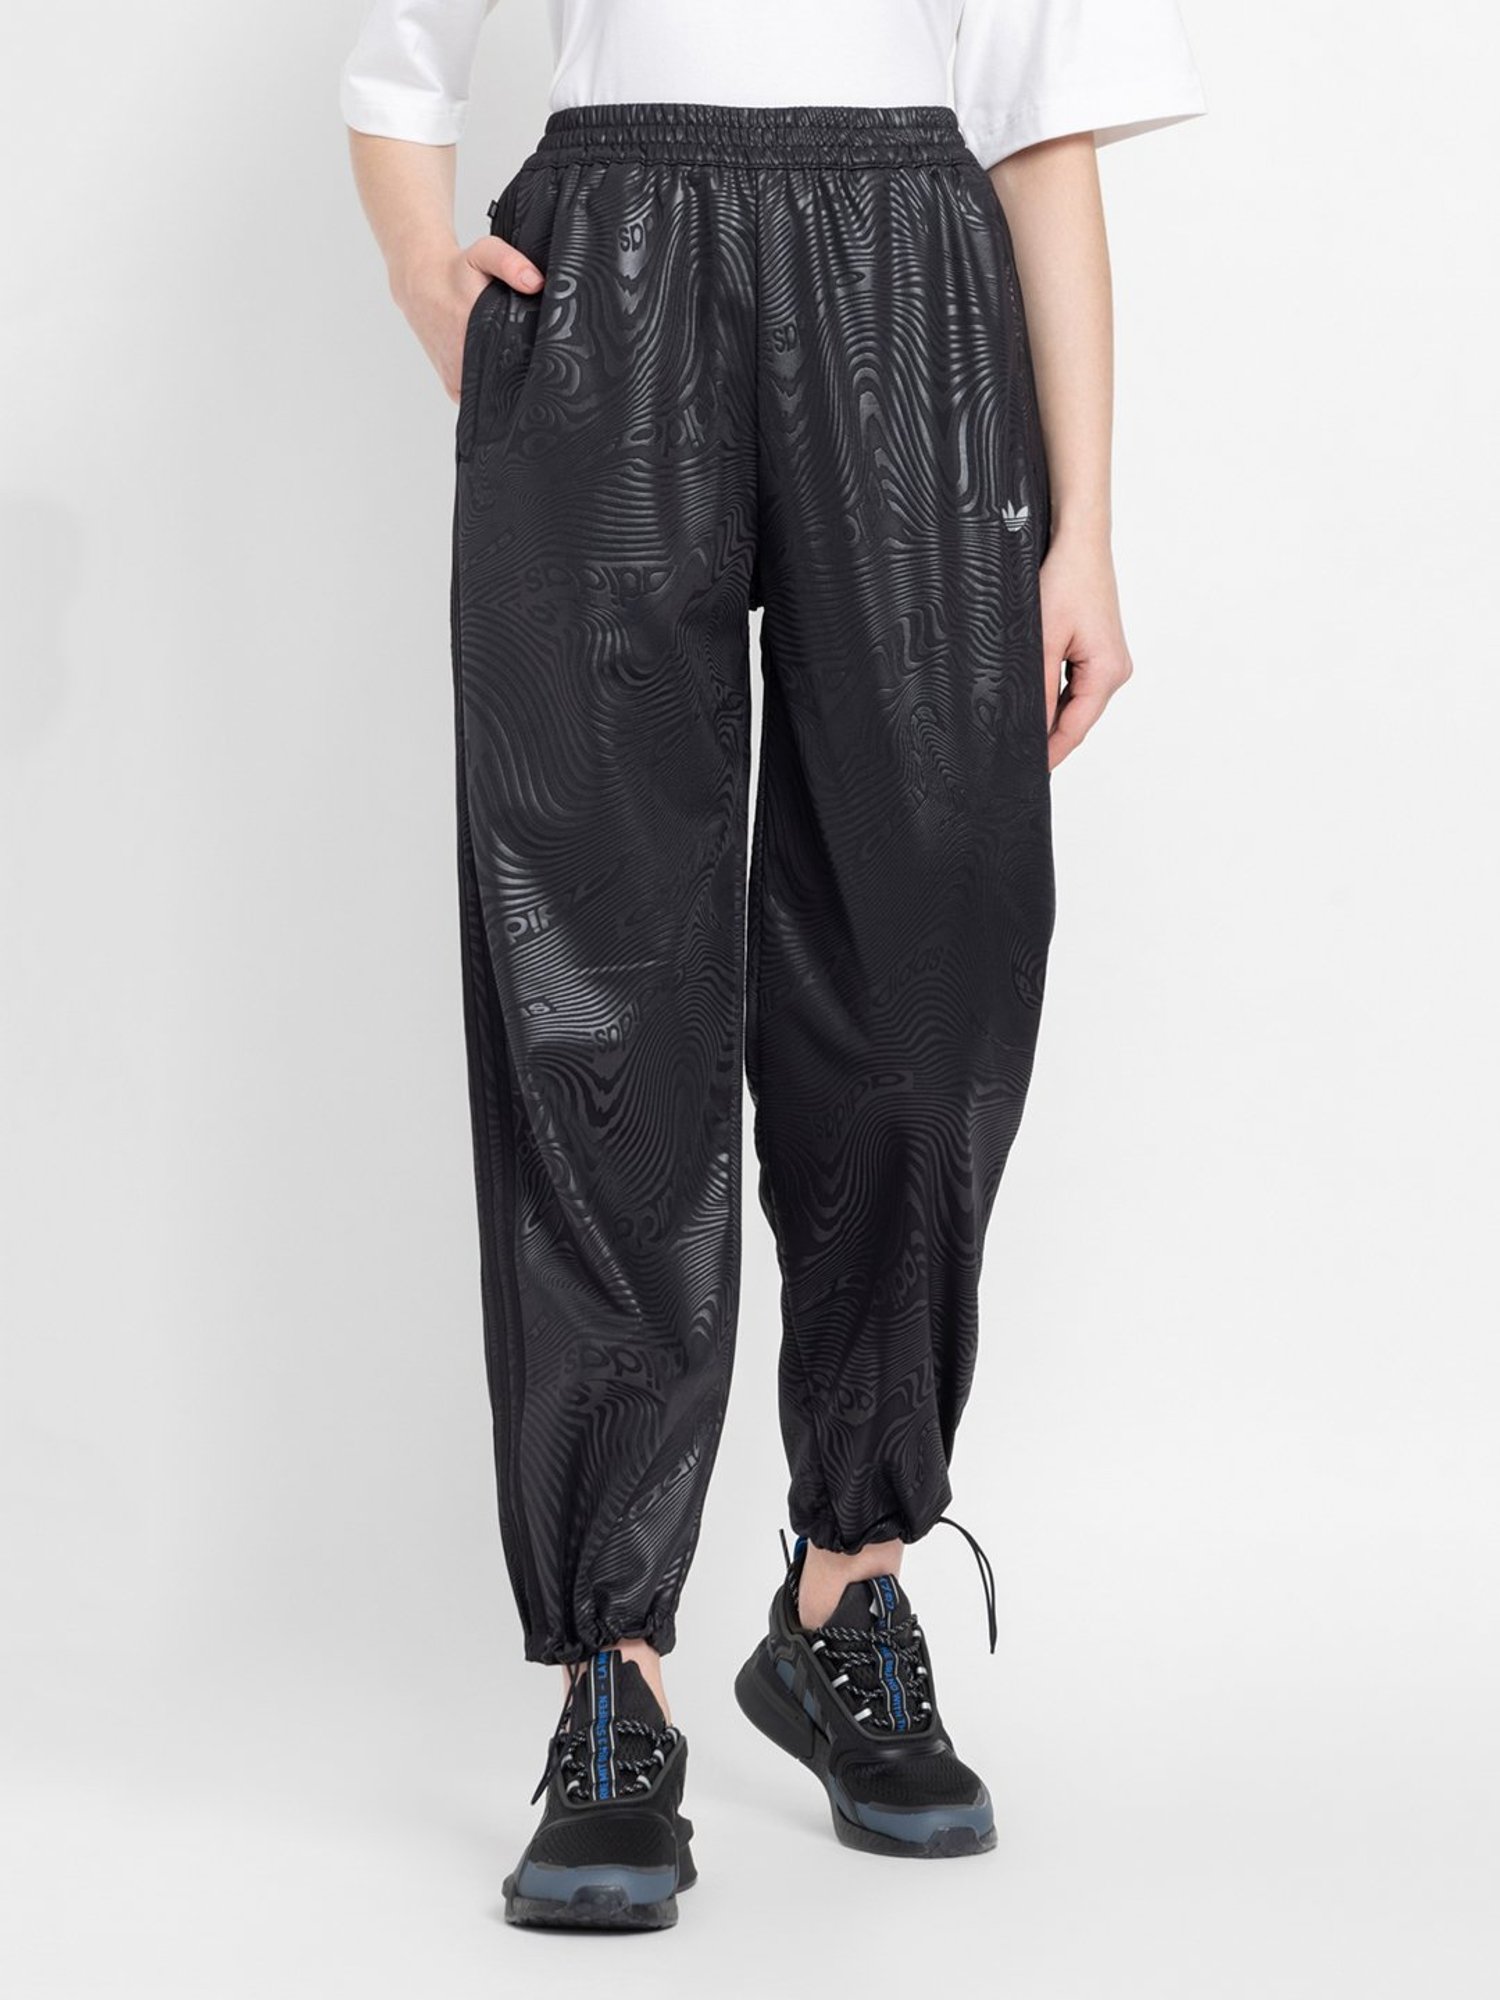 Buy Adidas Originals Black Relaxed Fit High Rise Track Pants for